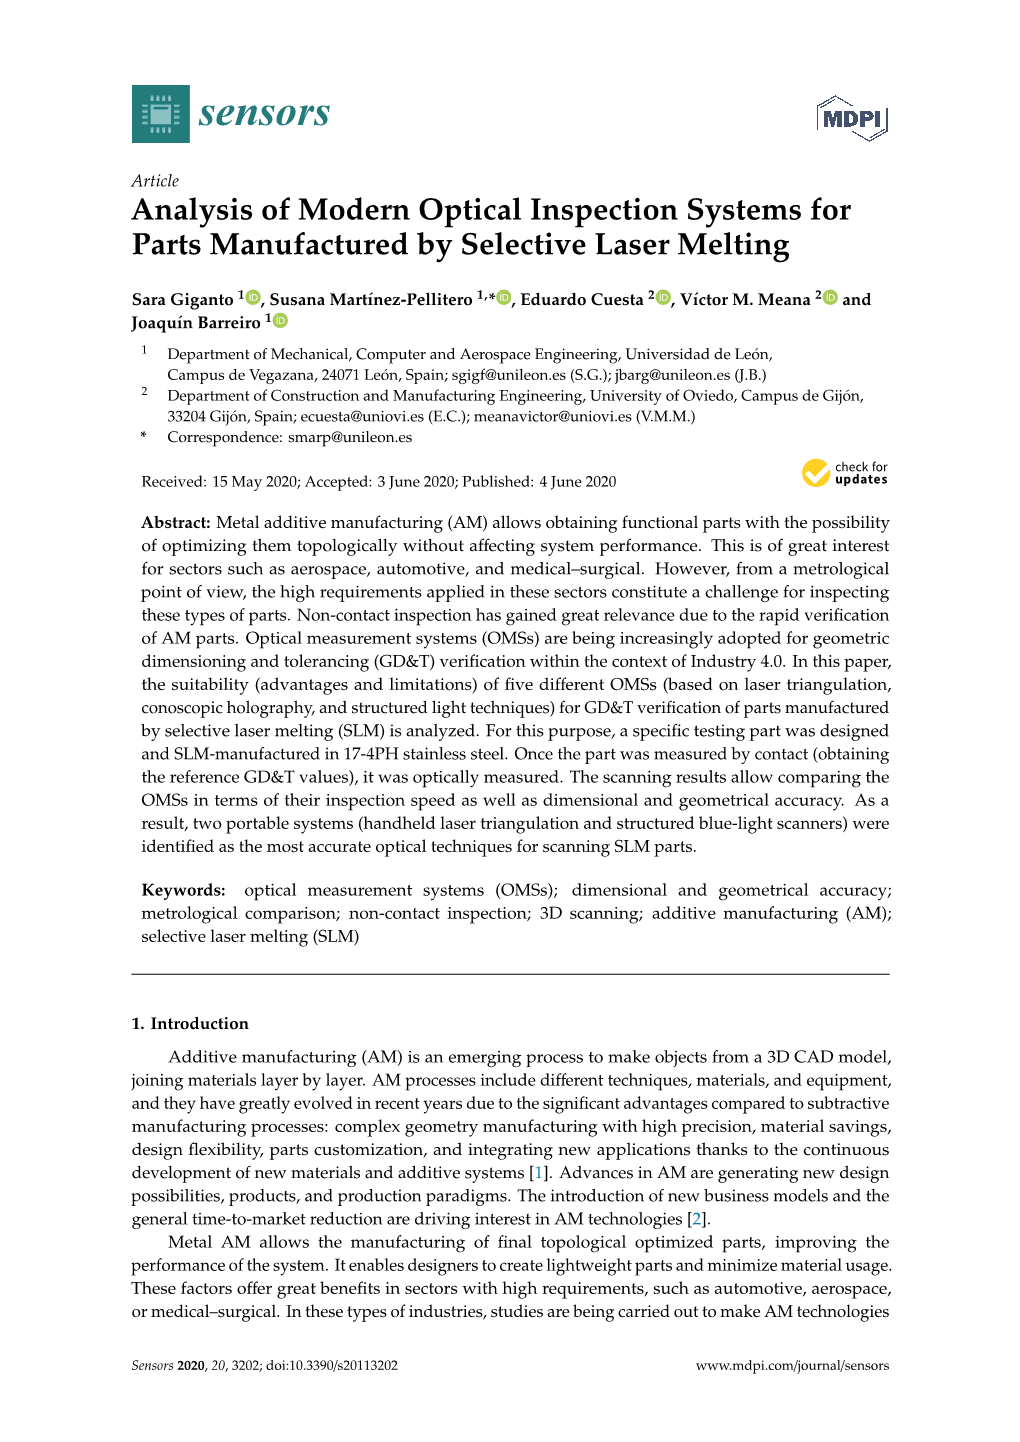 Analysis of Modern Optical Inspection Systems for Parts Manufactured by Selective Laser Melting